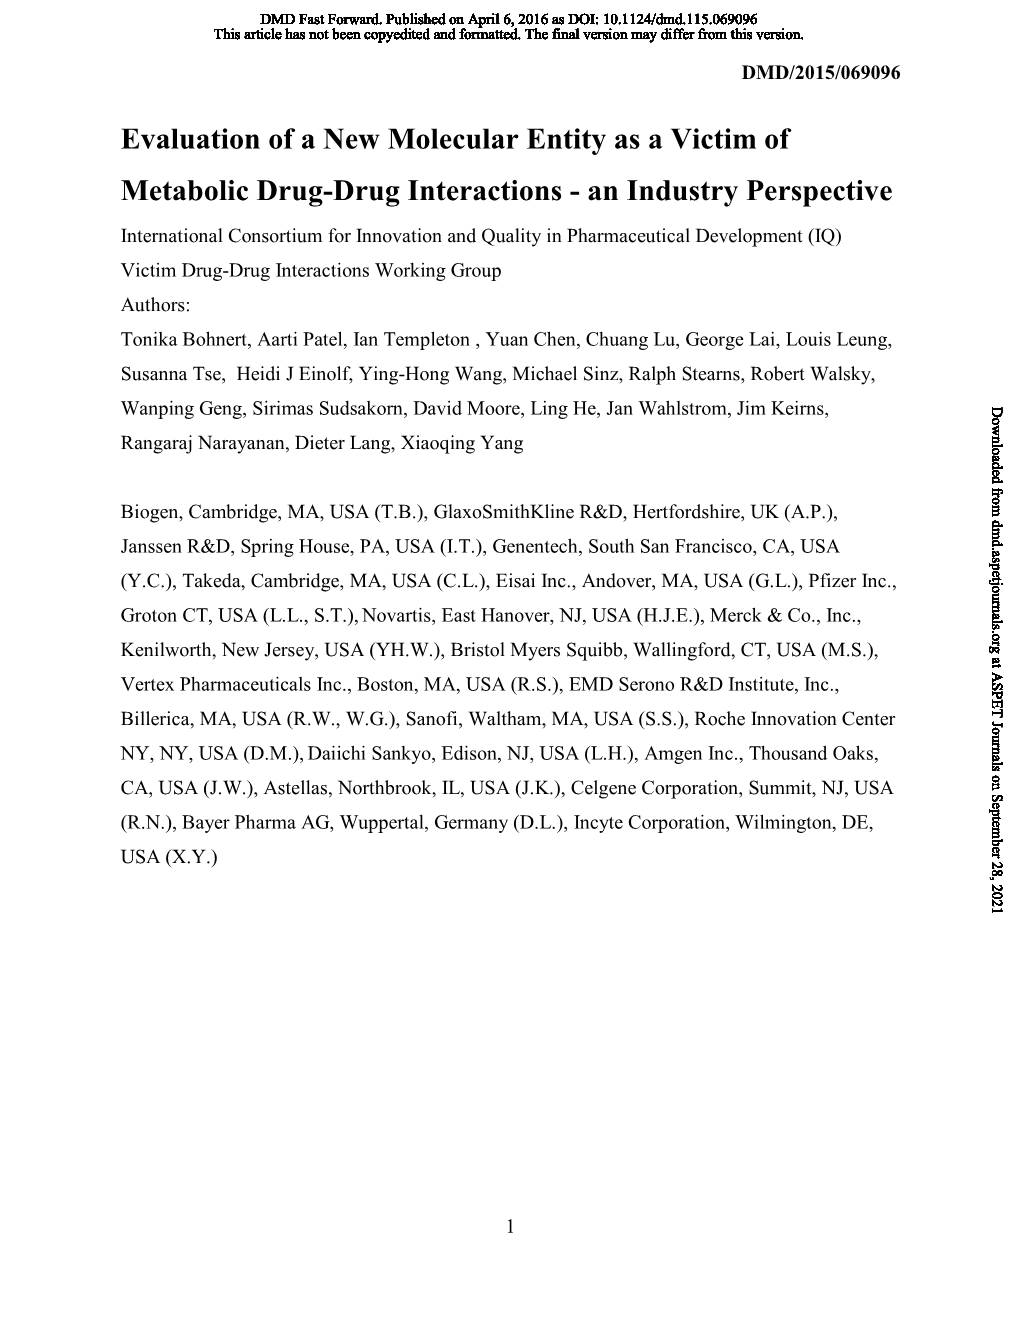 Evaluation of a New Molecular Entity As a Victim of Metabolic Drug-Drug Interactions - an Industry Perspective